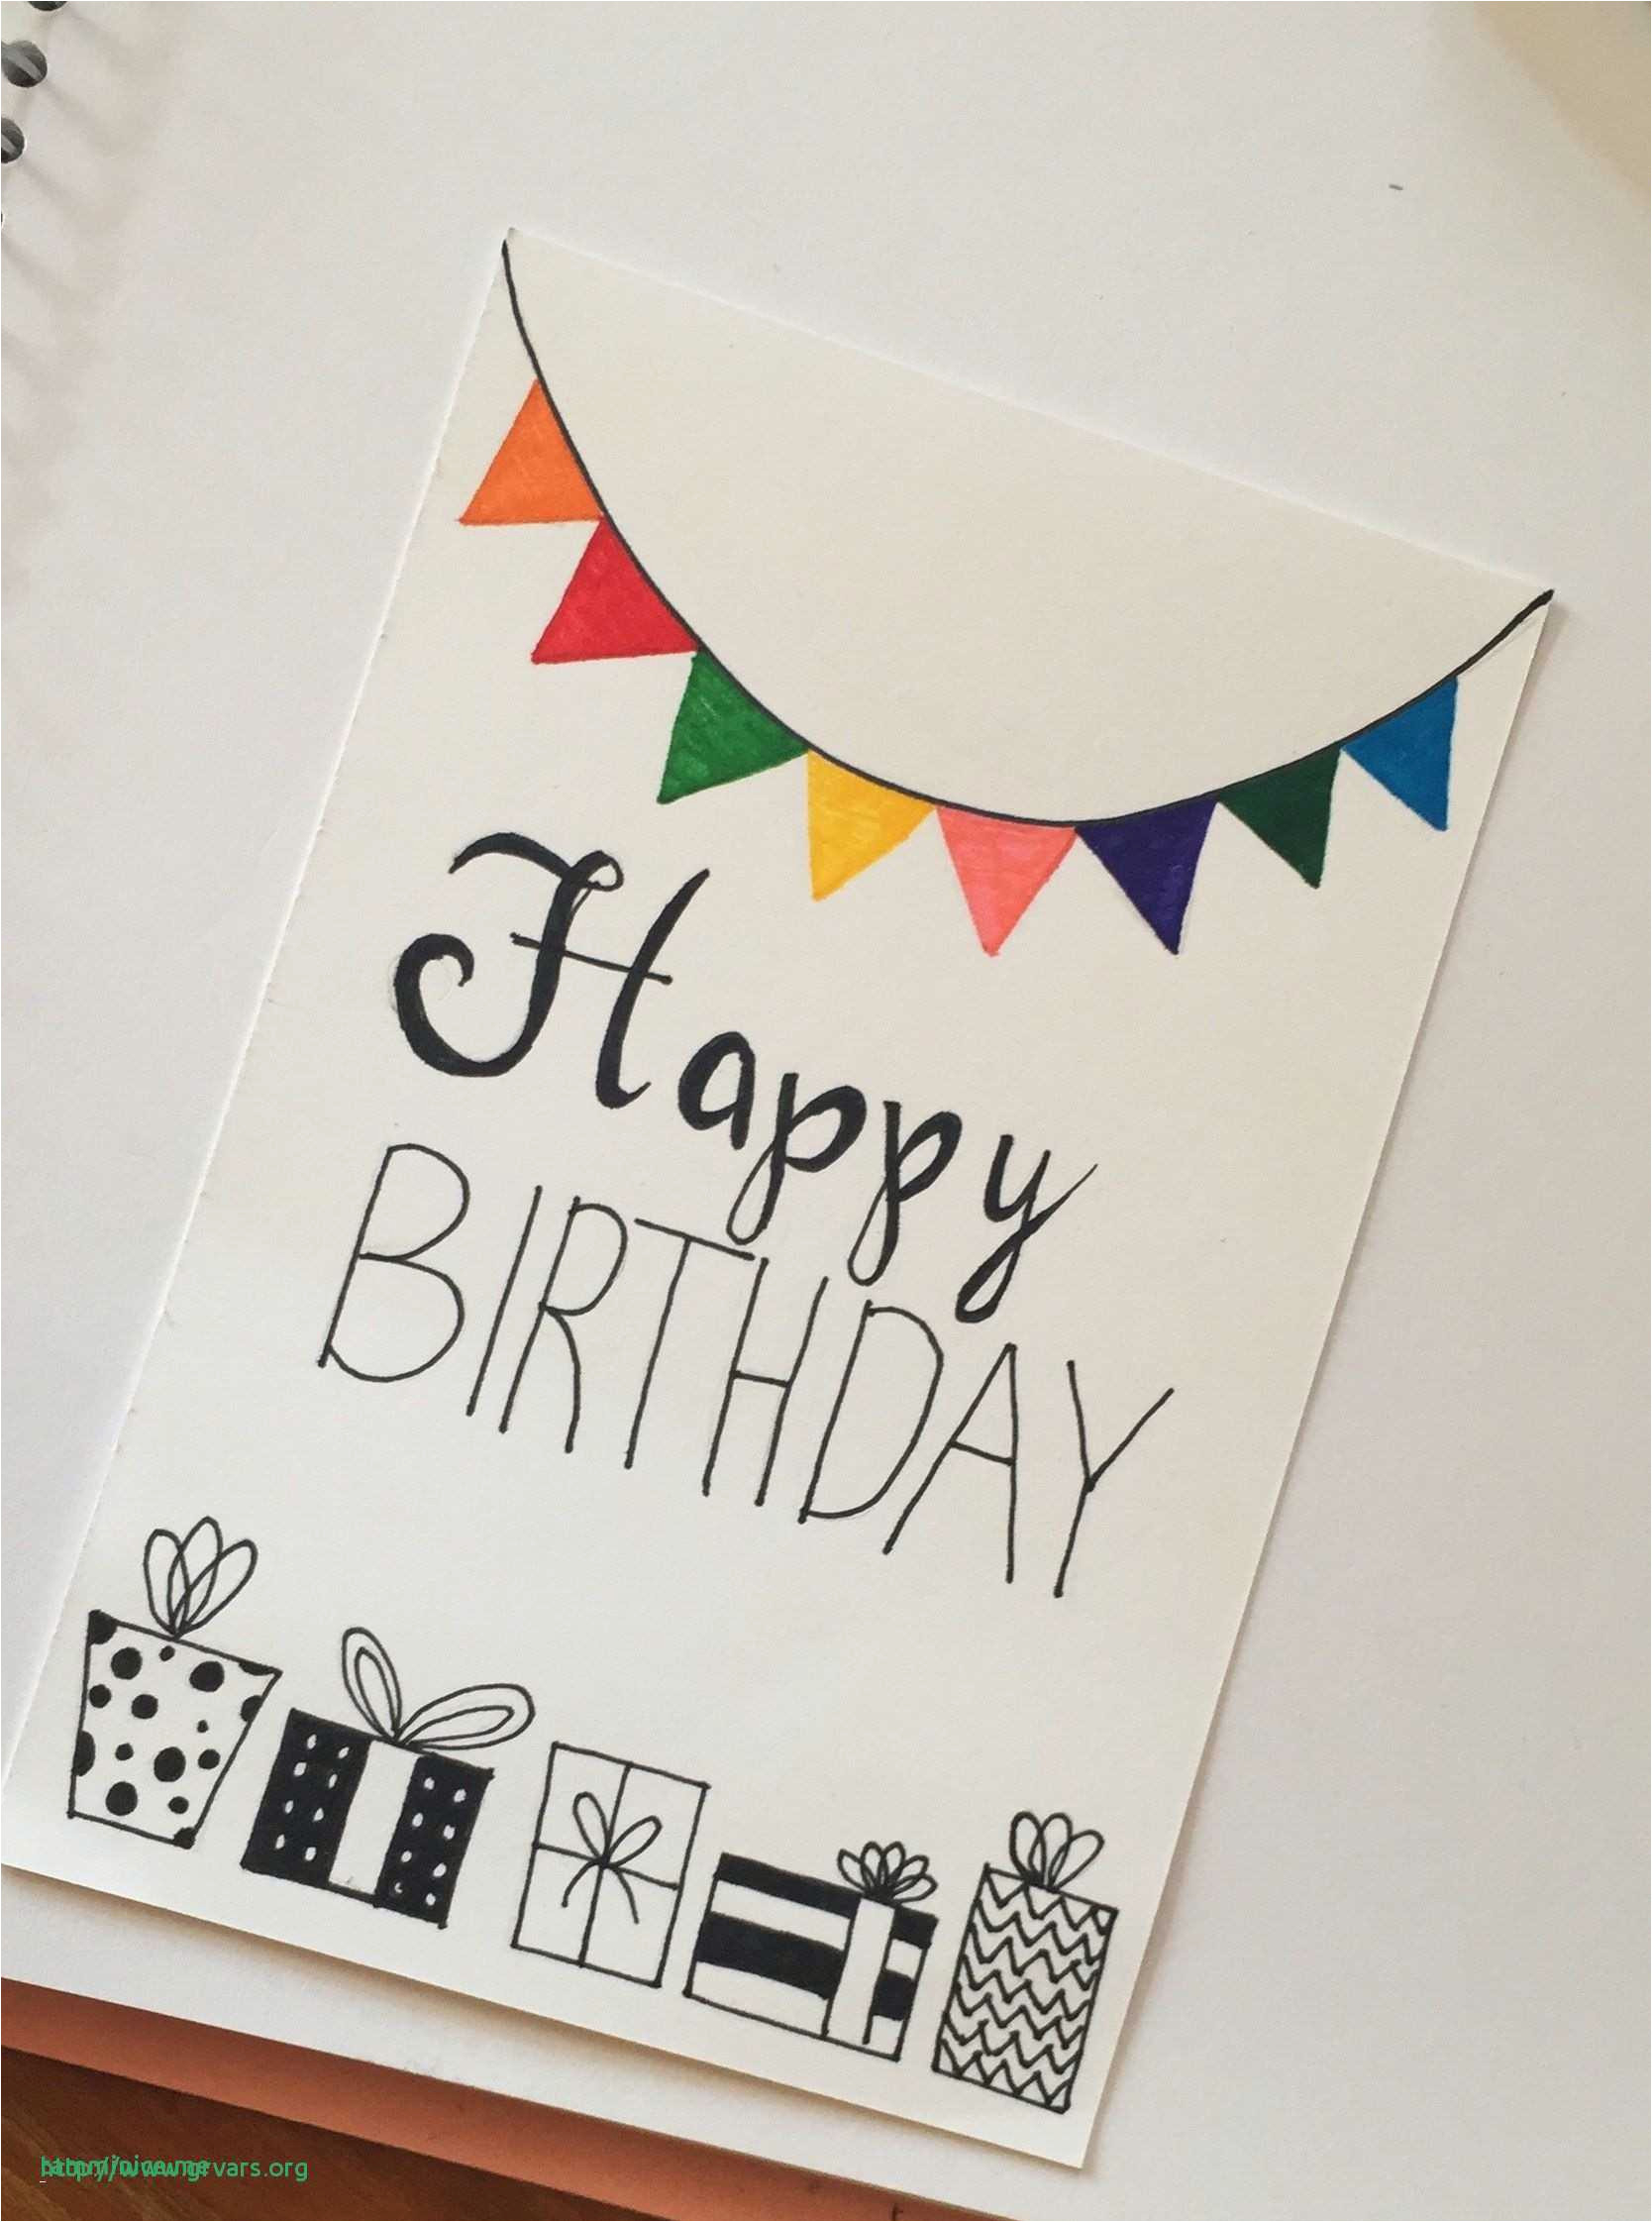 Handmade Birthday Card Ideas For Best Friend Diy Birthday Card Best Friend Simple Handmade Birthday Cards Awesome